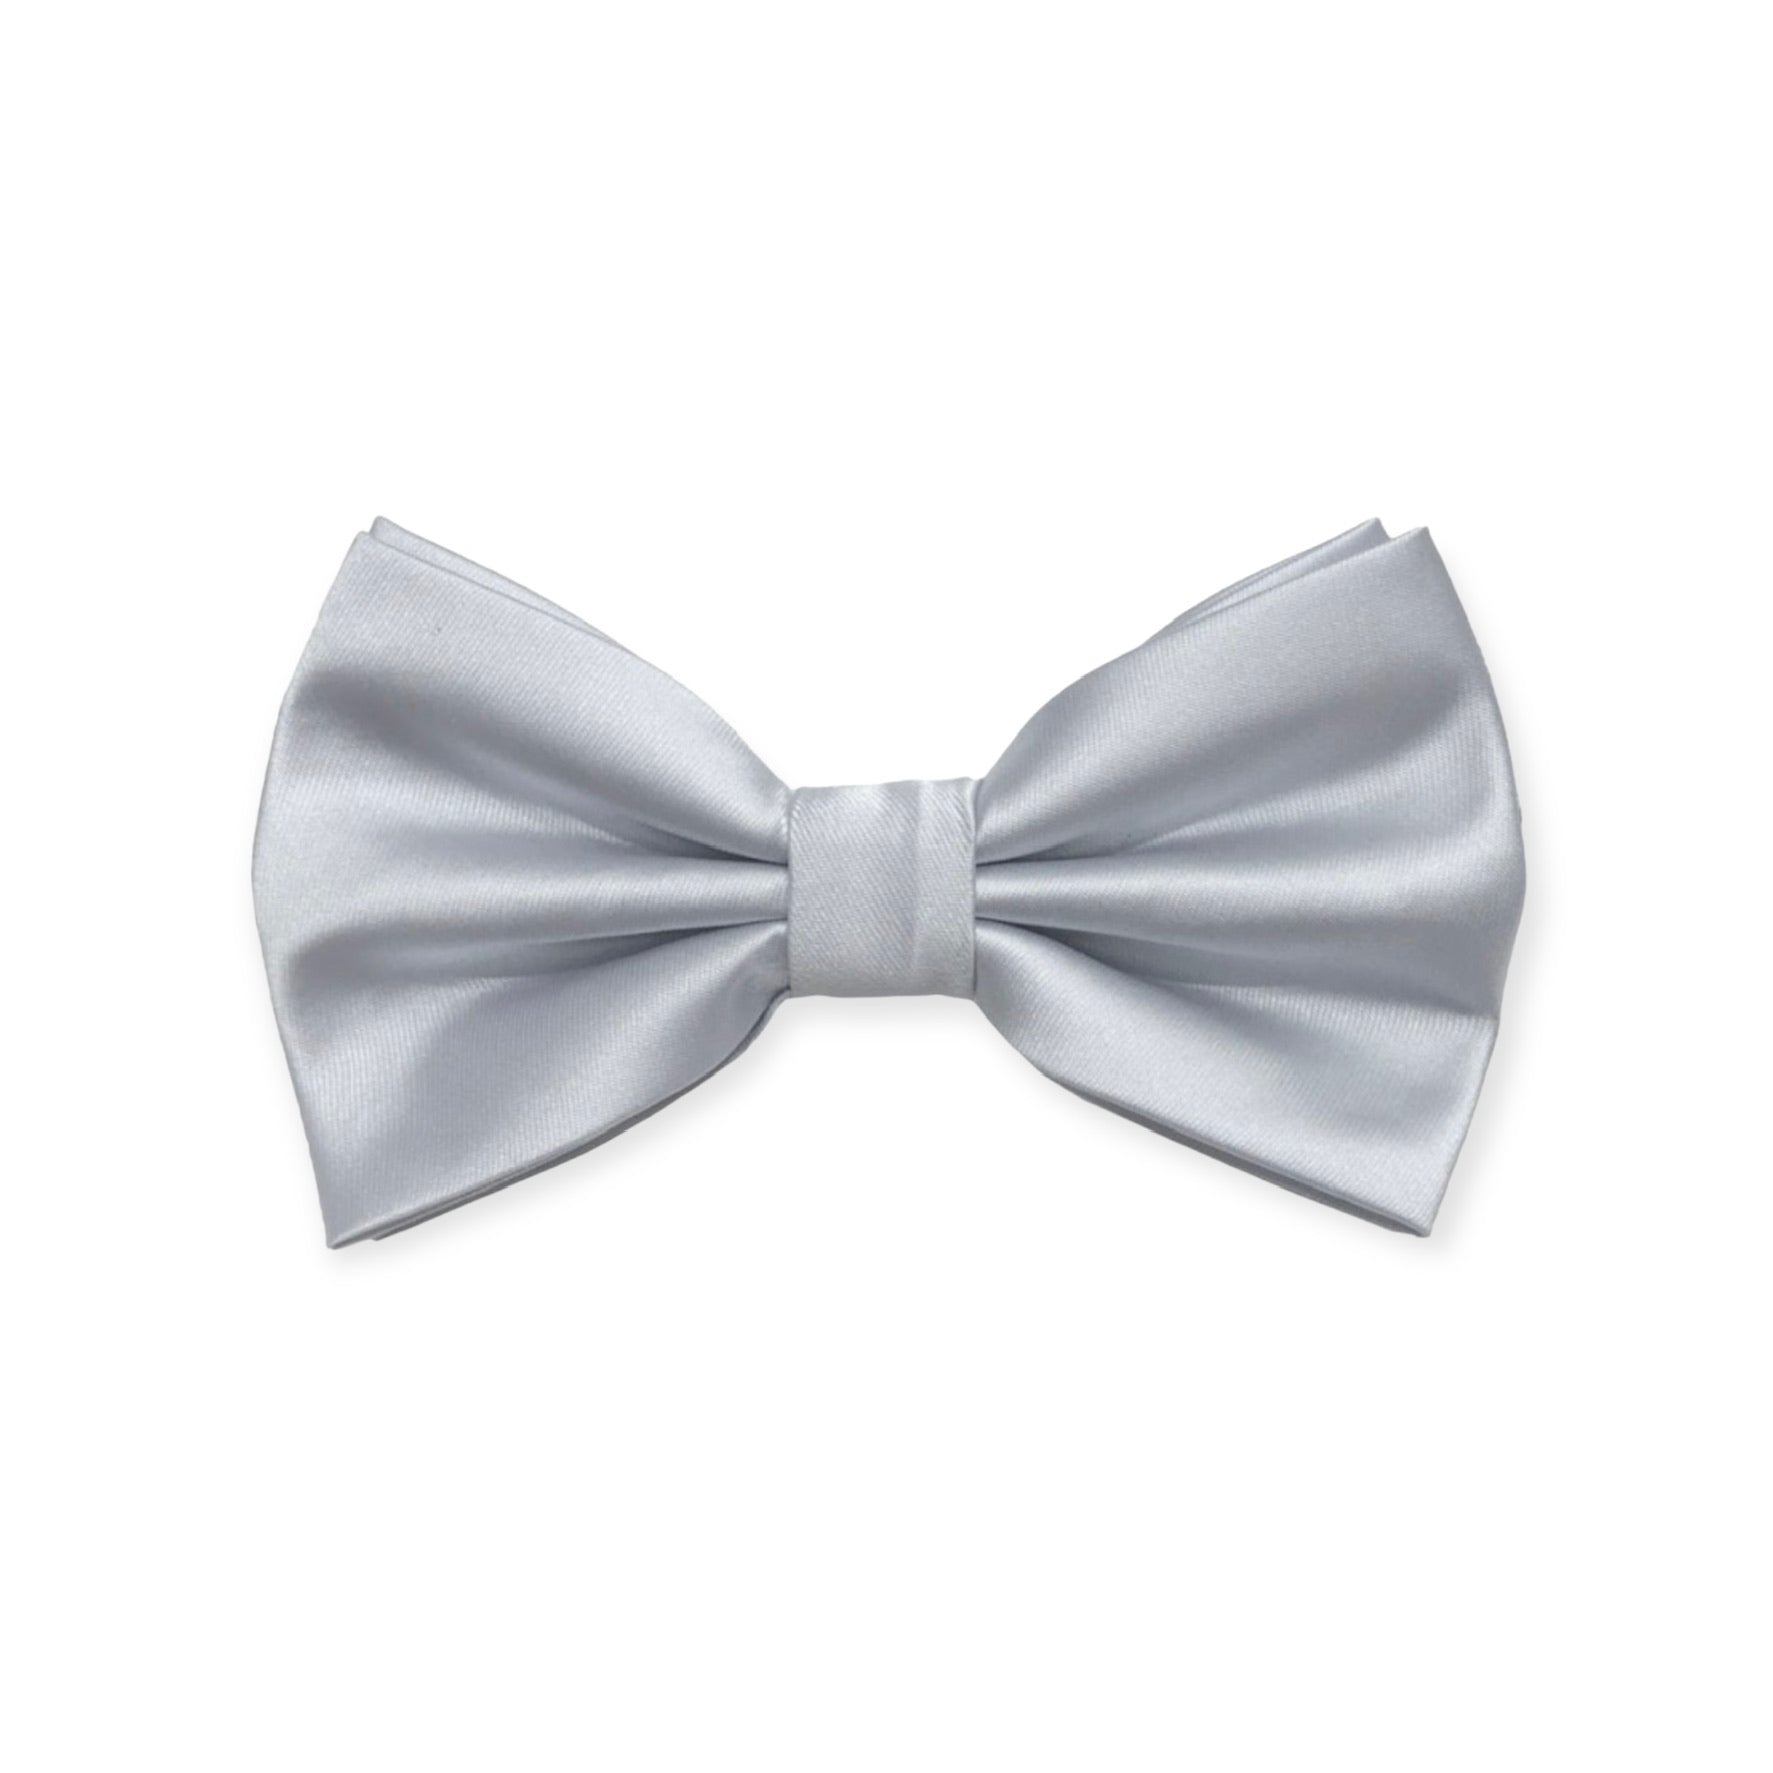 Solid Silver Bow Tie and Hanky